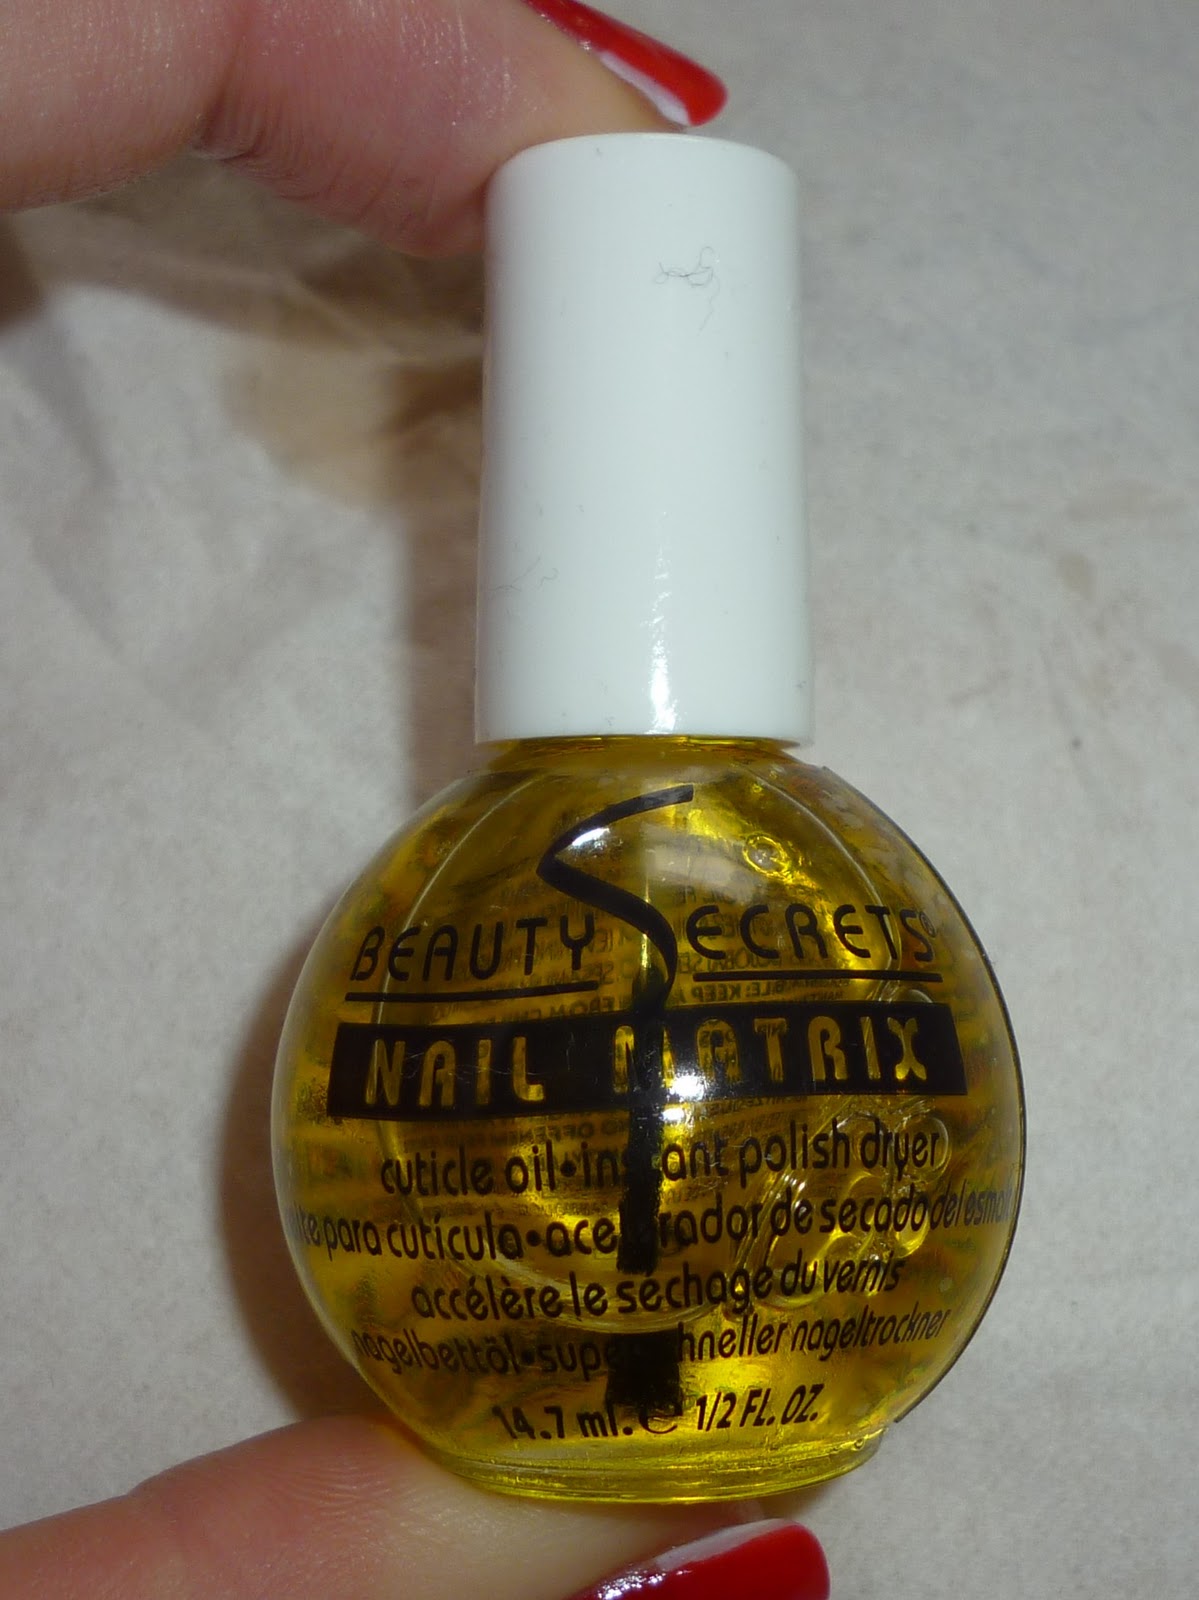 I picked this one up in sally's, as well as a cuticle oil it helps your nail